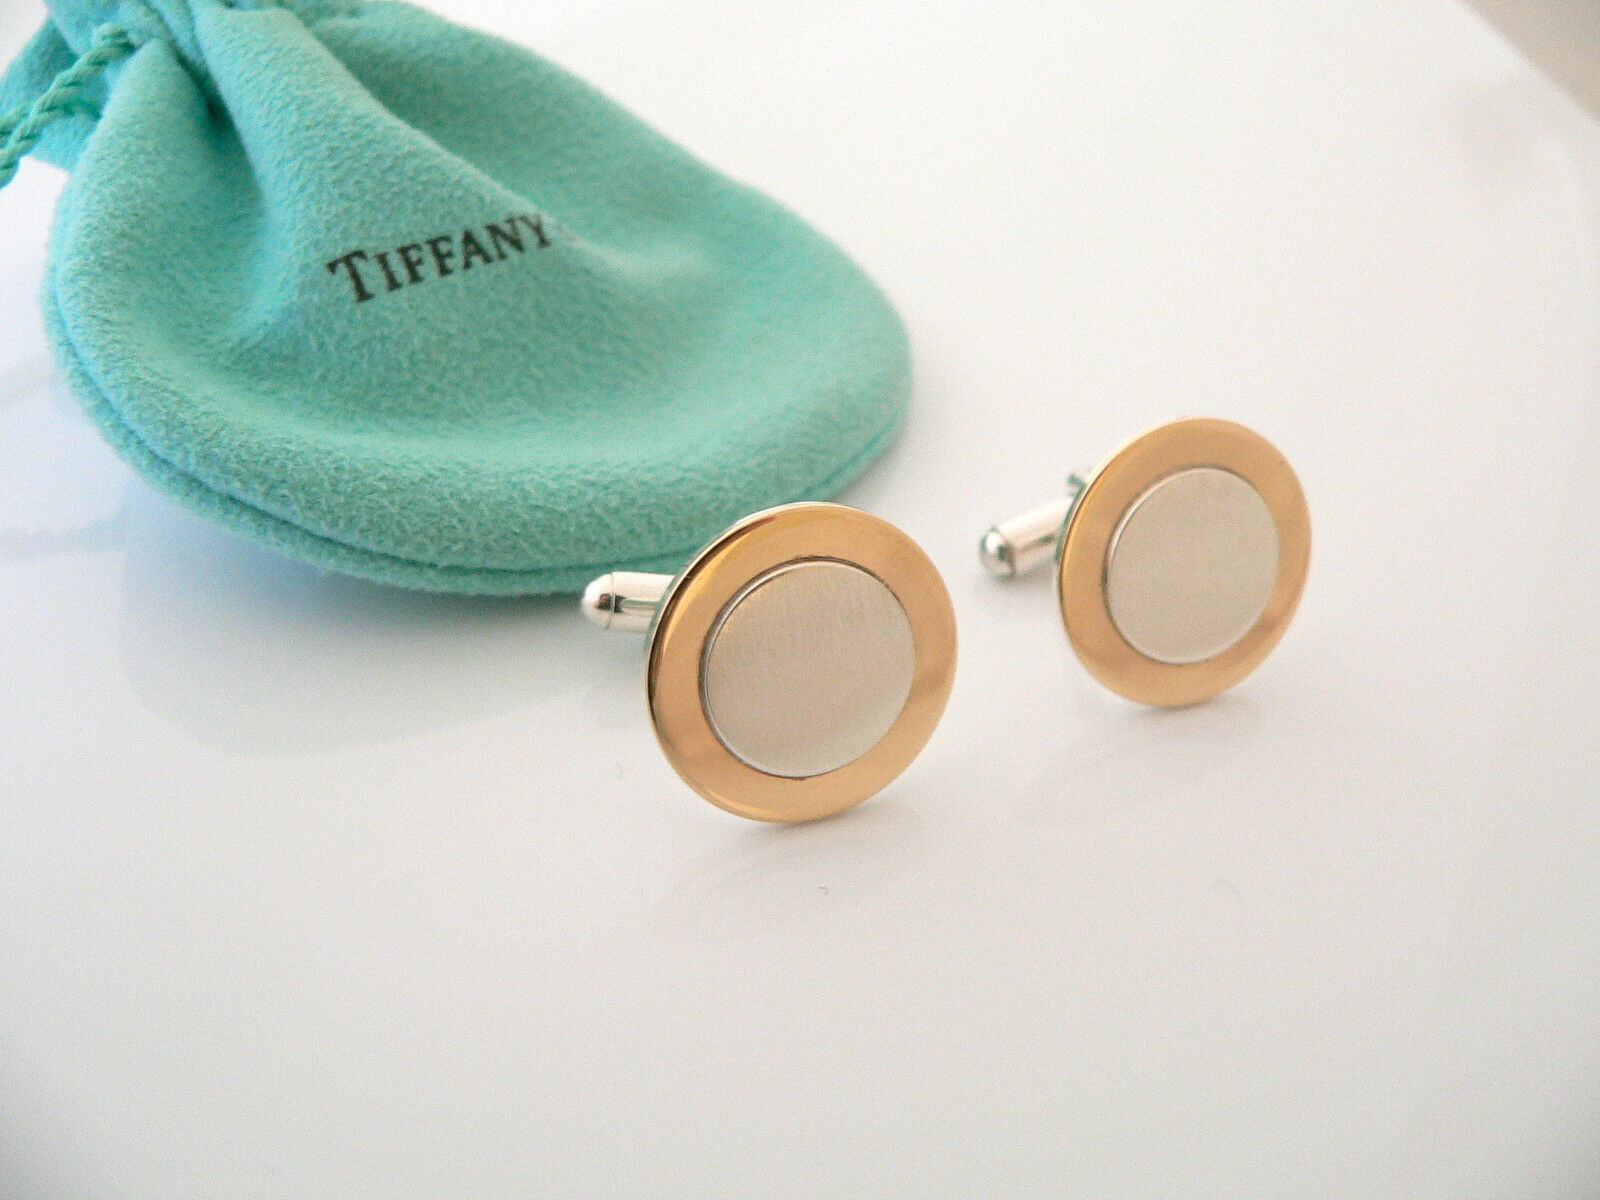 Tiffany & Co Silver 18K Gold Circle Cuff Links Rare Engravable Gift Pouch Love